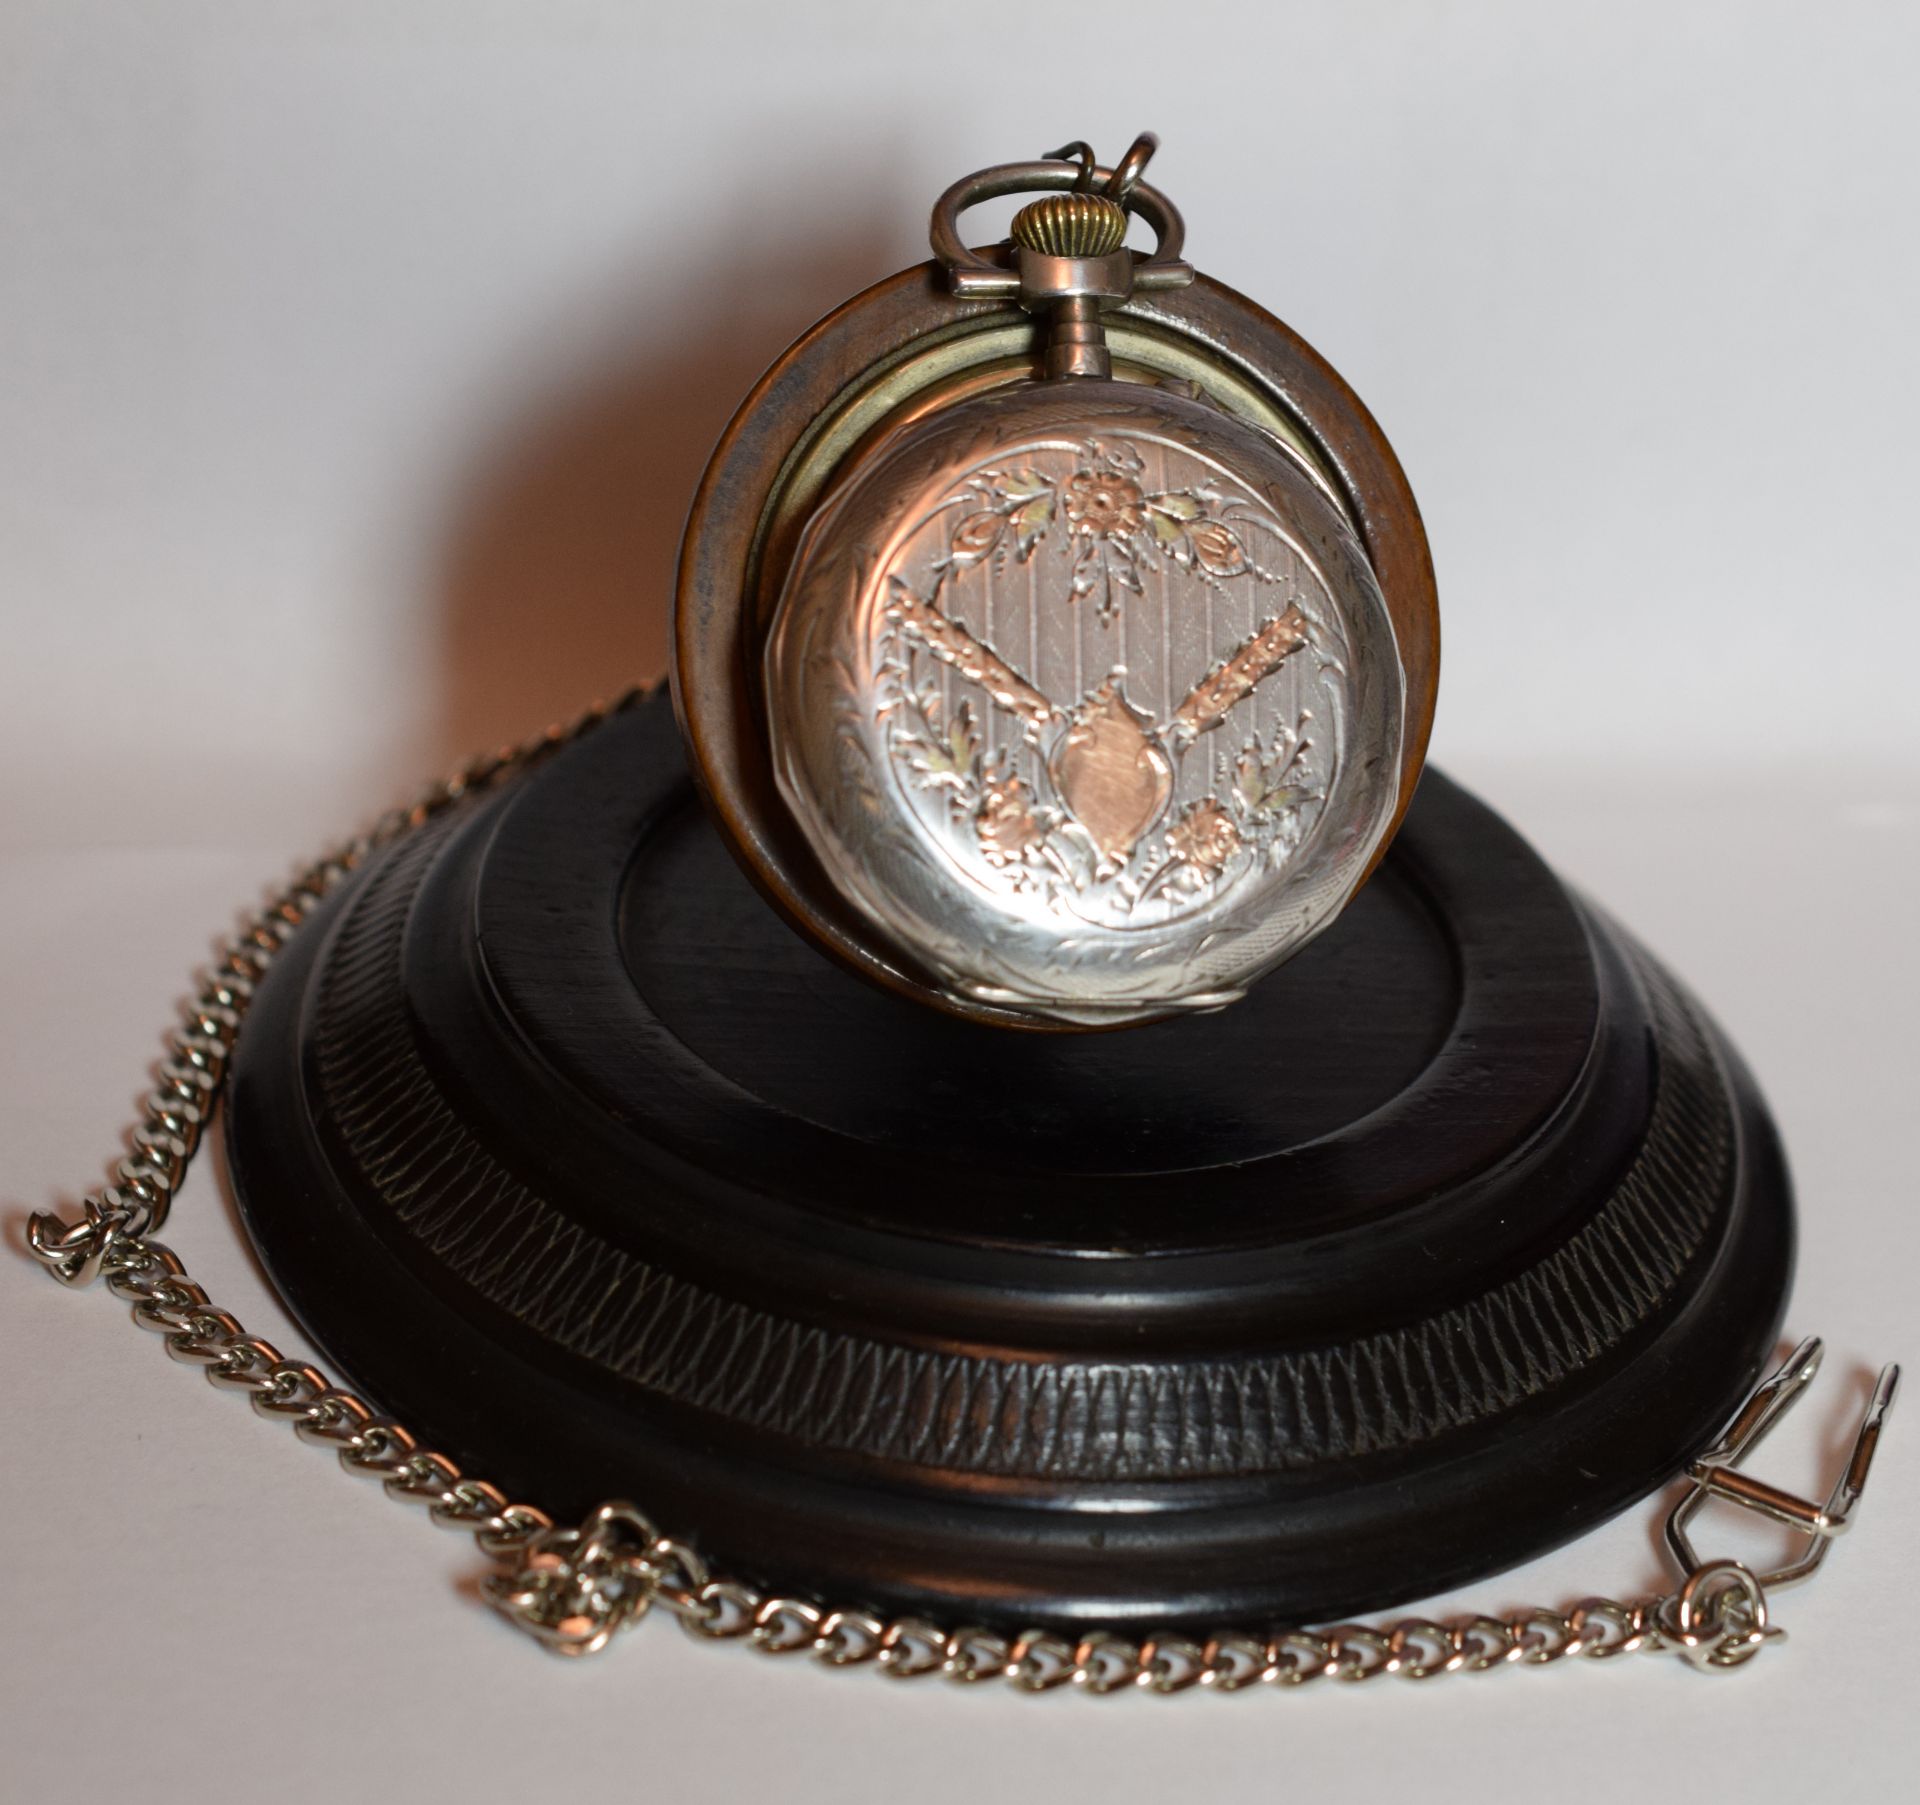 Silver Cased French Pocket Watch With Movement Signed C.Crettiez On Display Stand - Image 4 of 9